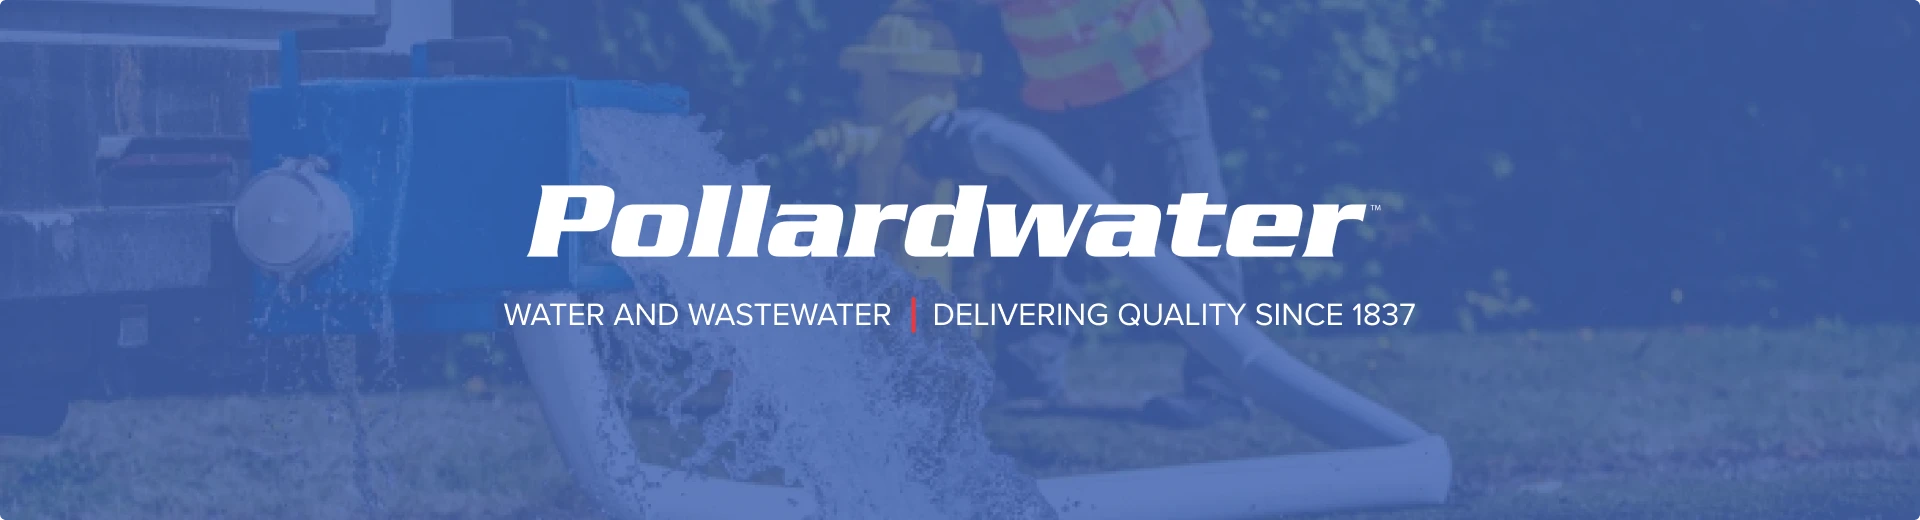 Pollardwater, Water and Wastewater, Delivering Quality Since 1837